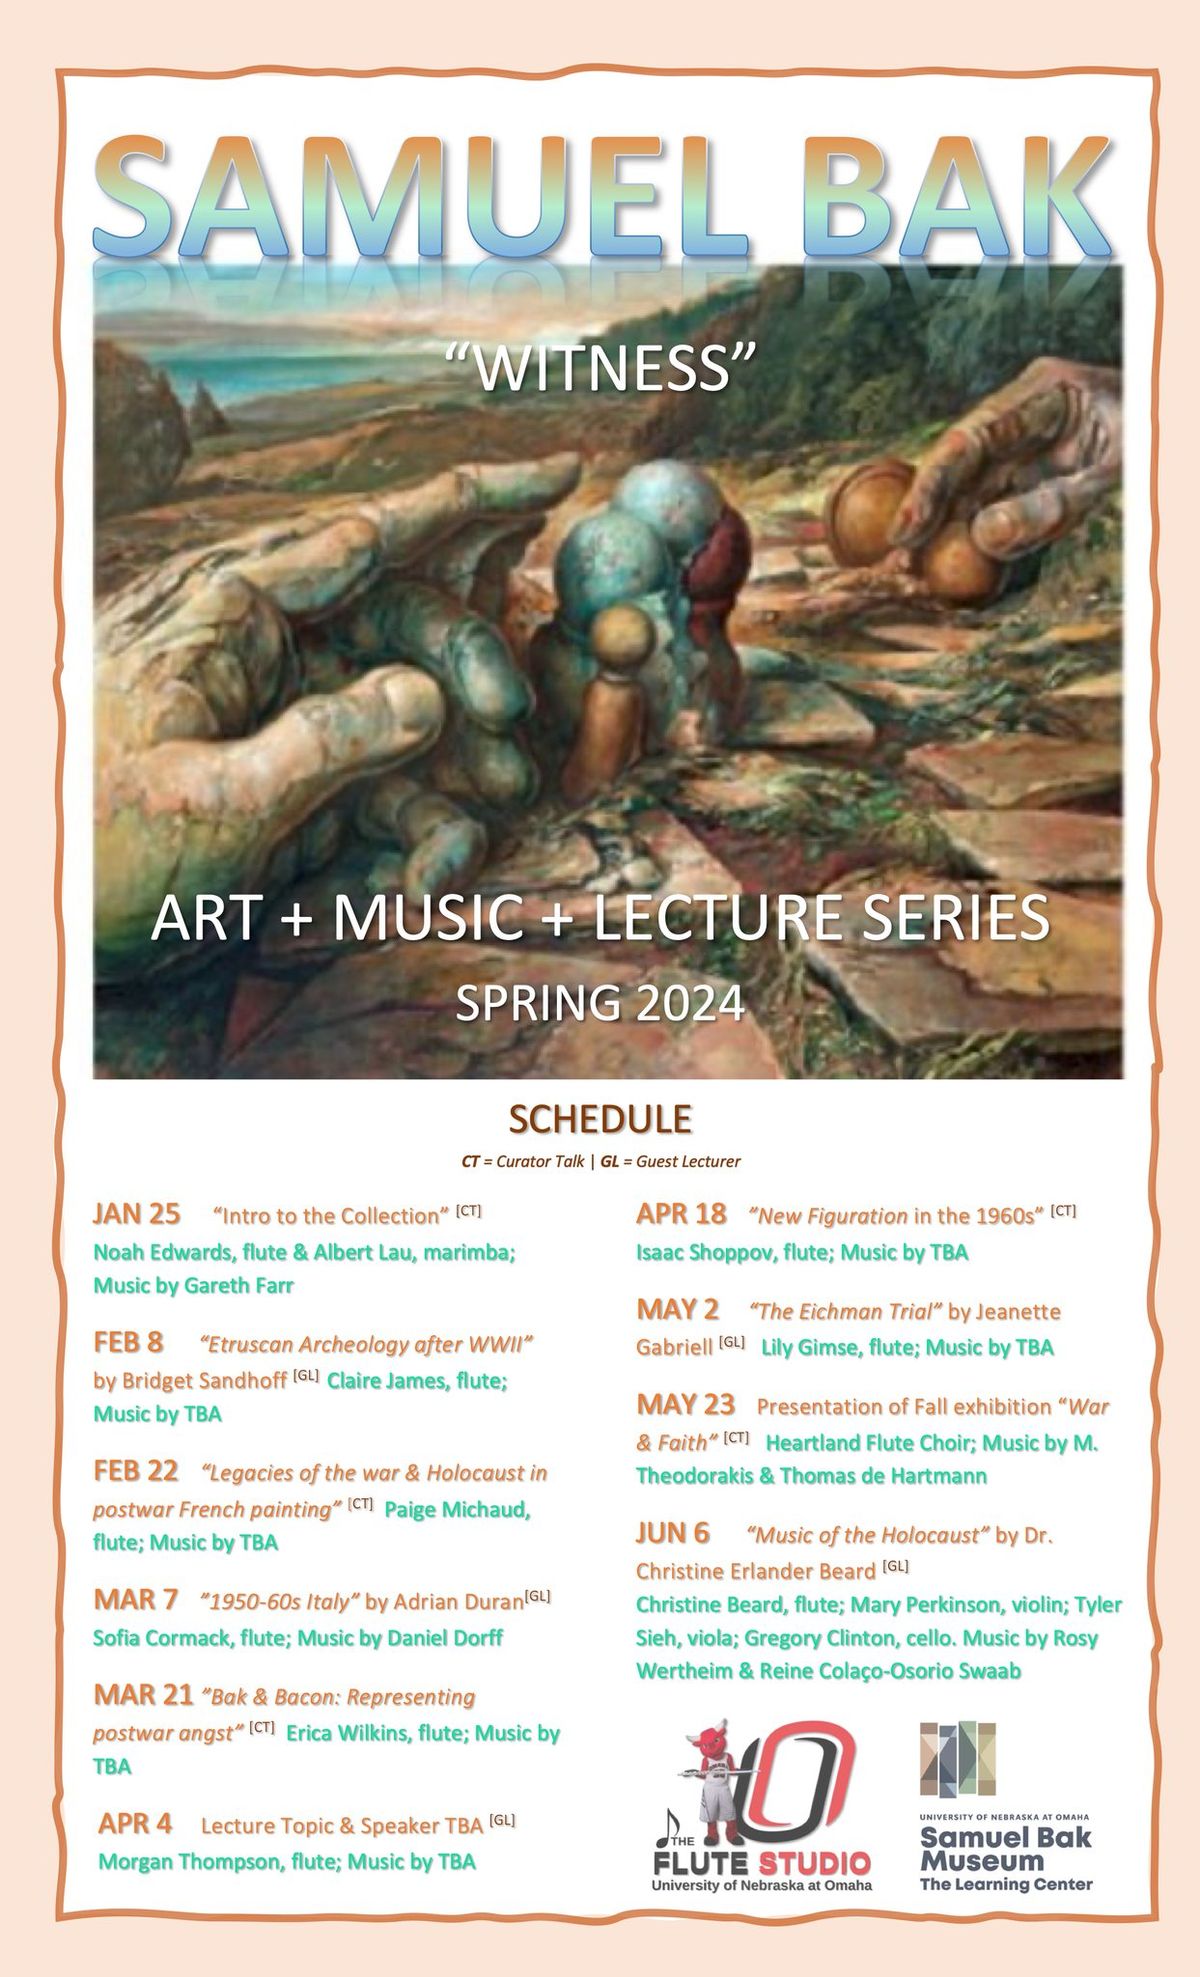 Art+Music+Lecture Series